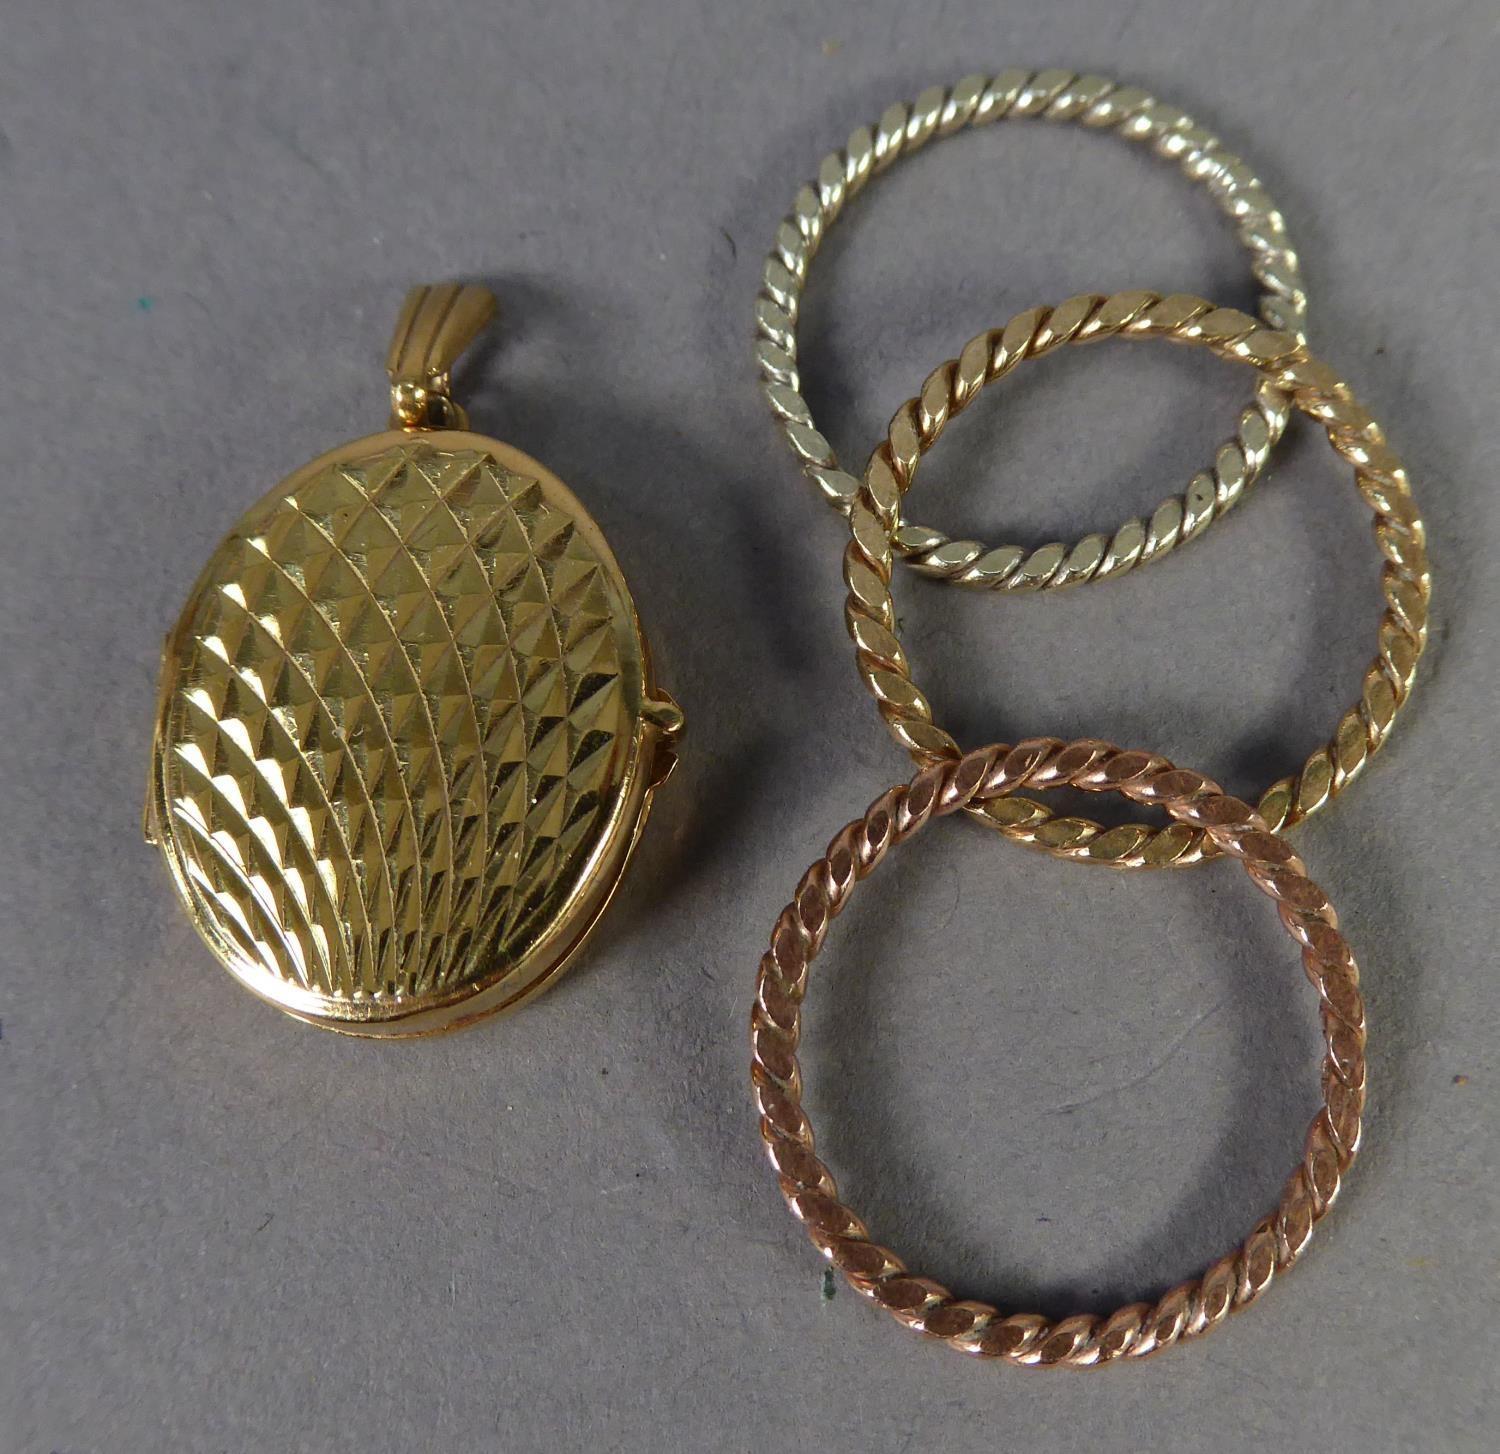 9ct GOLD SMALL OVAL LOCKET PENDANT with engine turned decoration and a set of THREE HALLMARKED 9ct